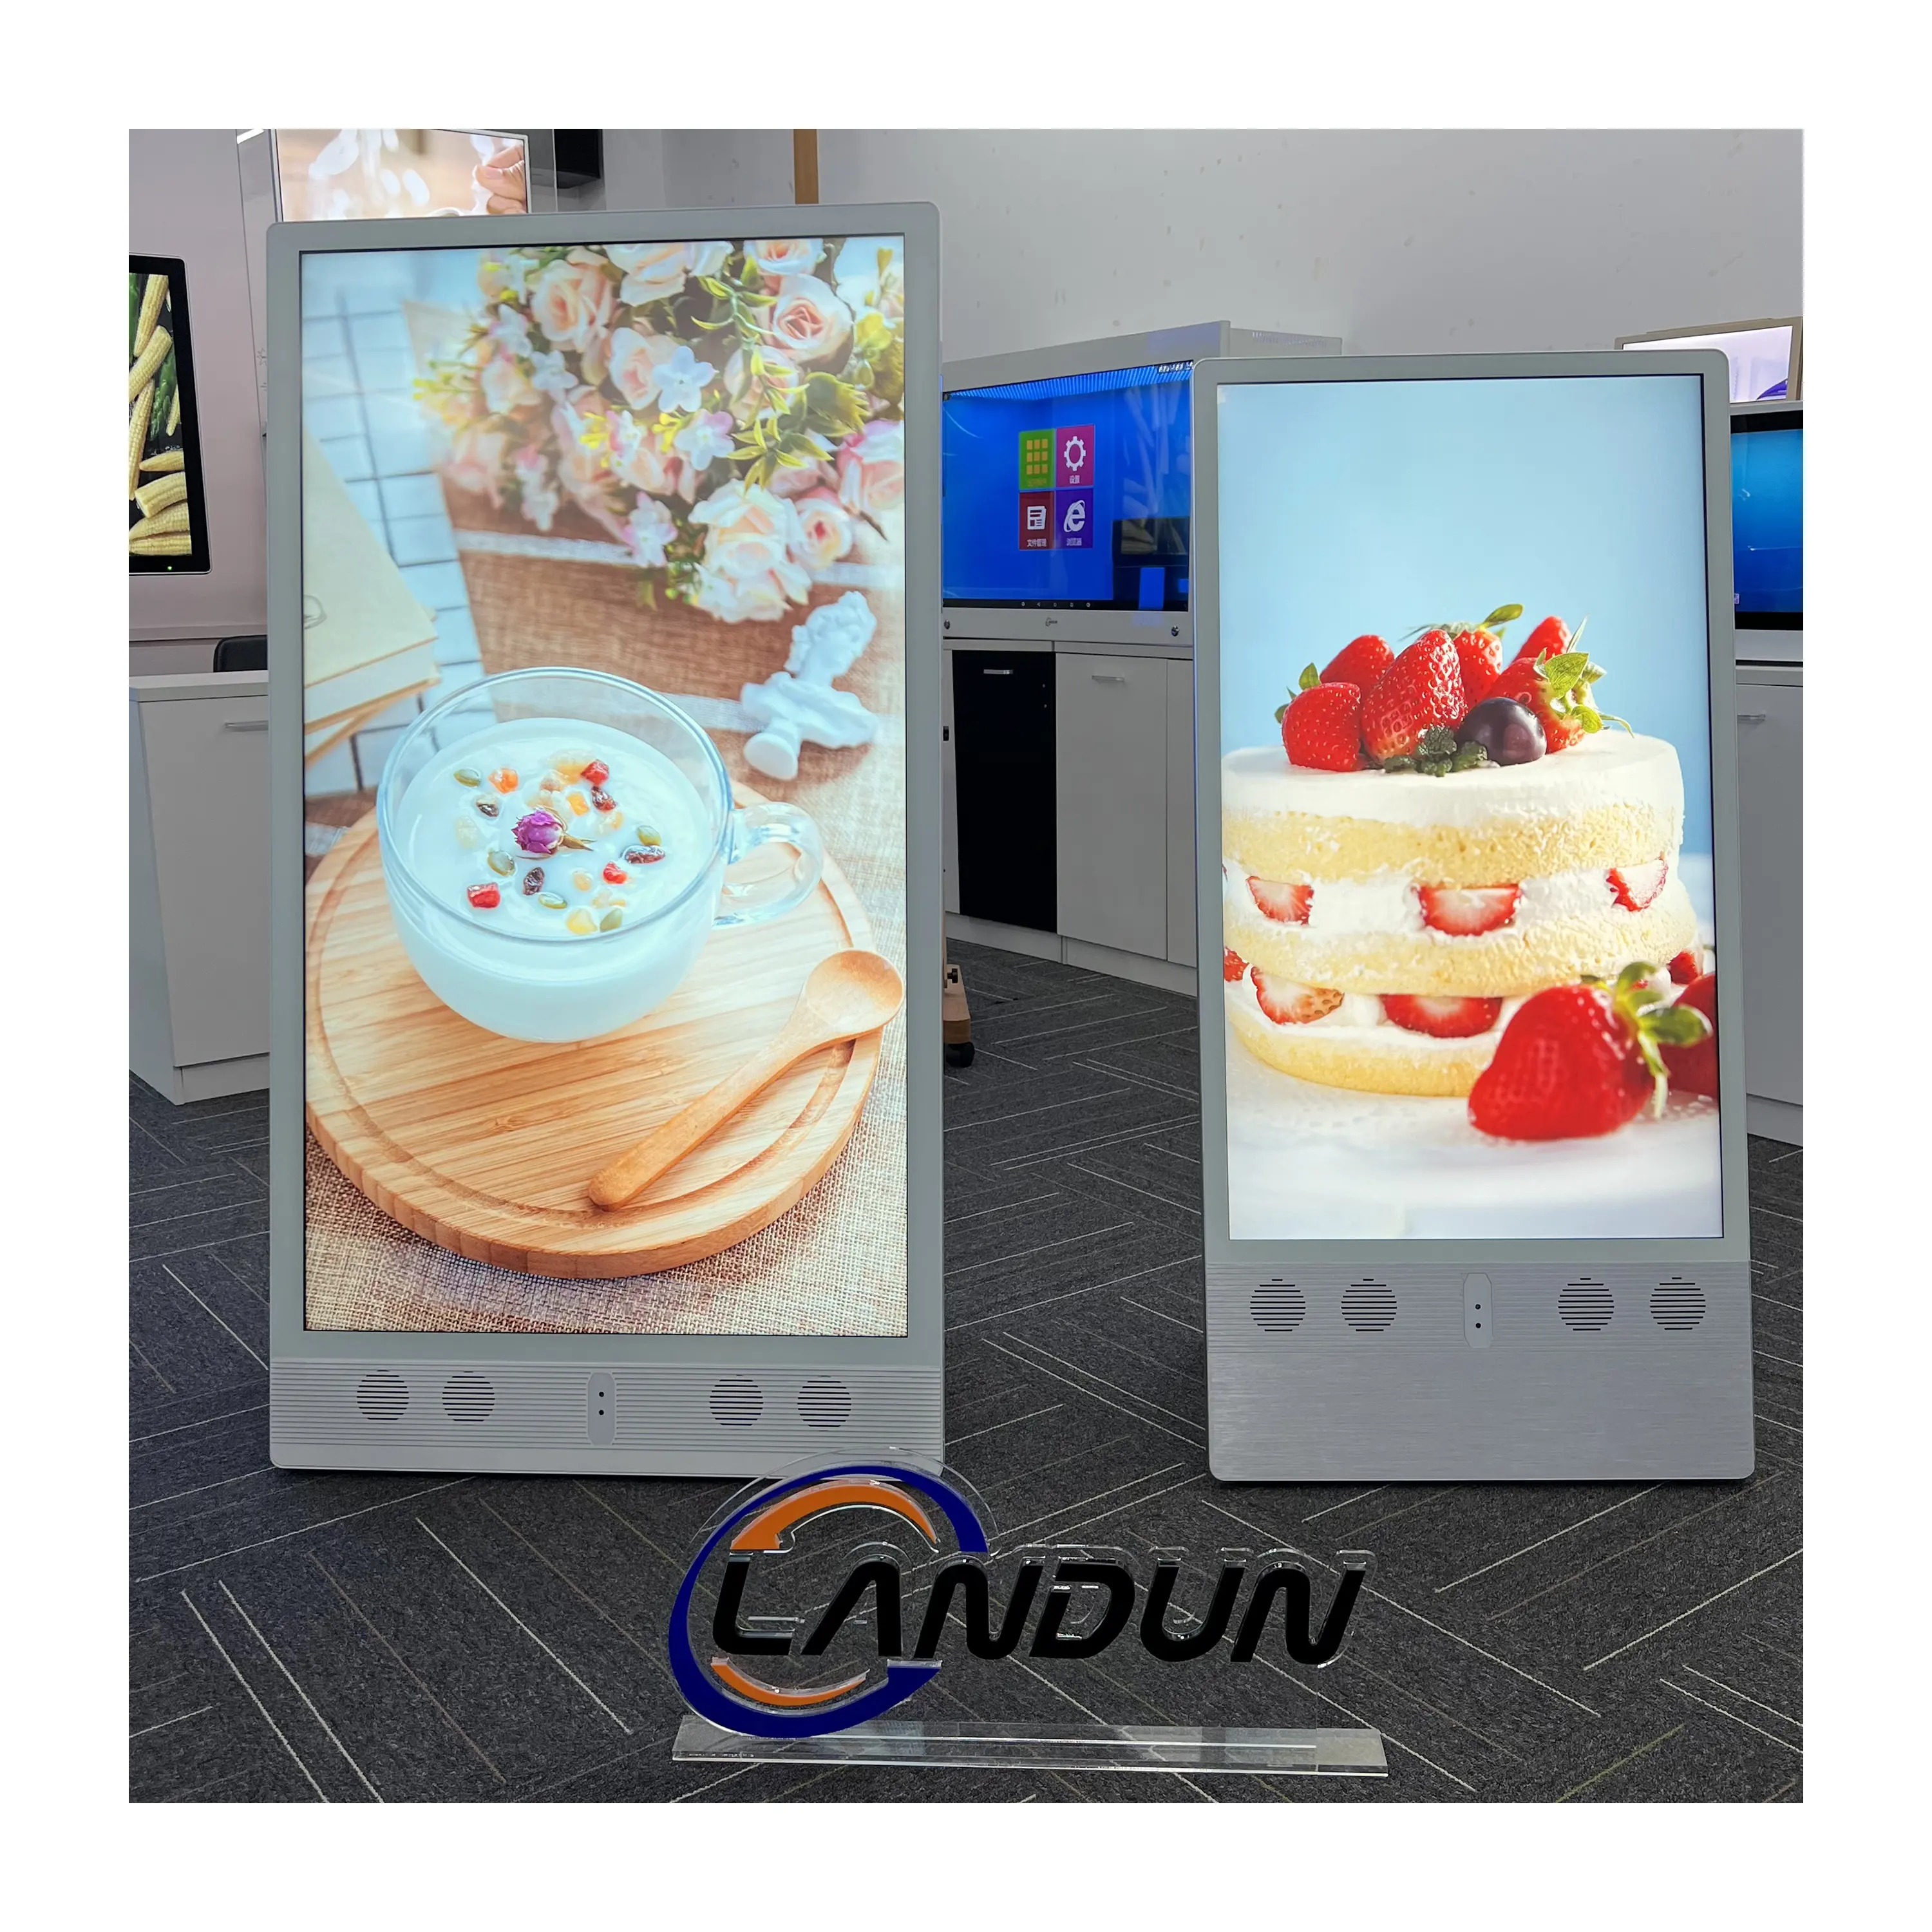 32 inch 43 inch 49 inch outdoor waterproof IP65 portable kiosk with wheels advertisement totem digital signage screen